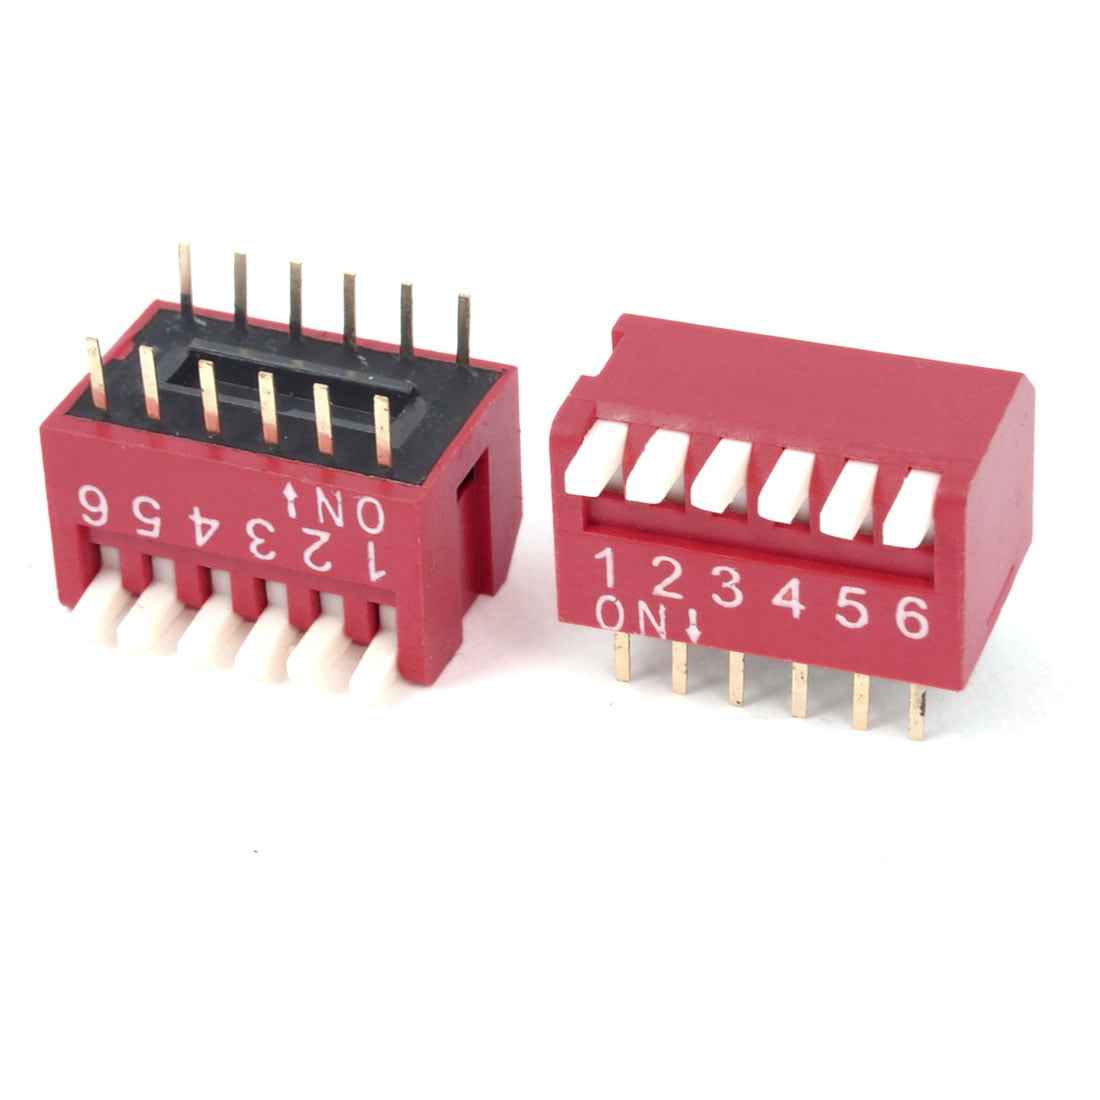 5x 4-Way Piano DIP DIL Red PCB Switch 